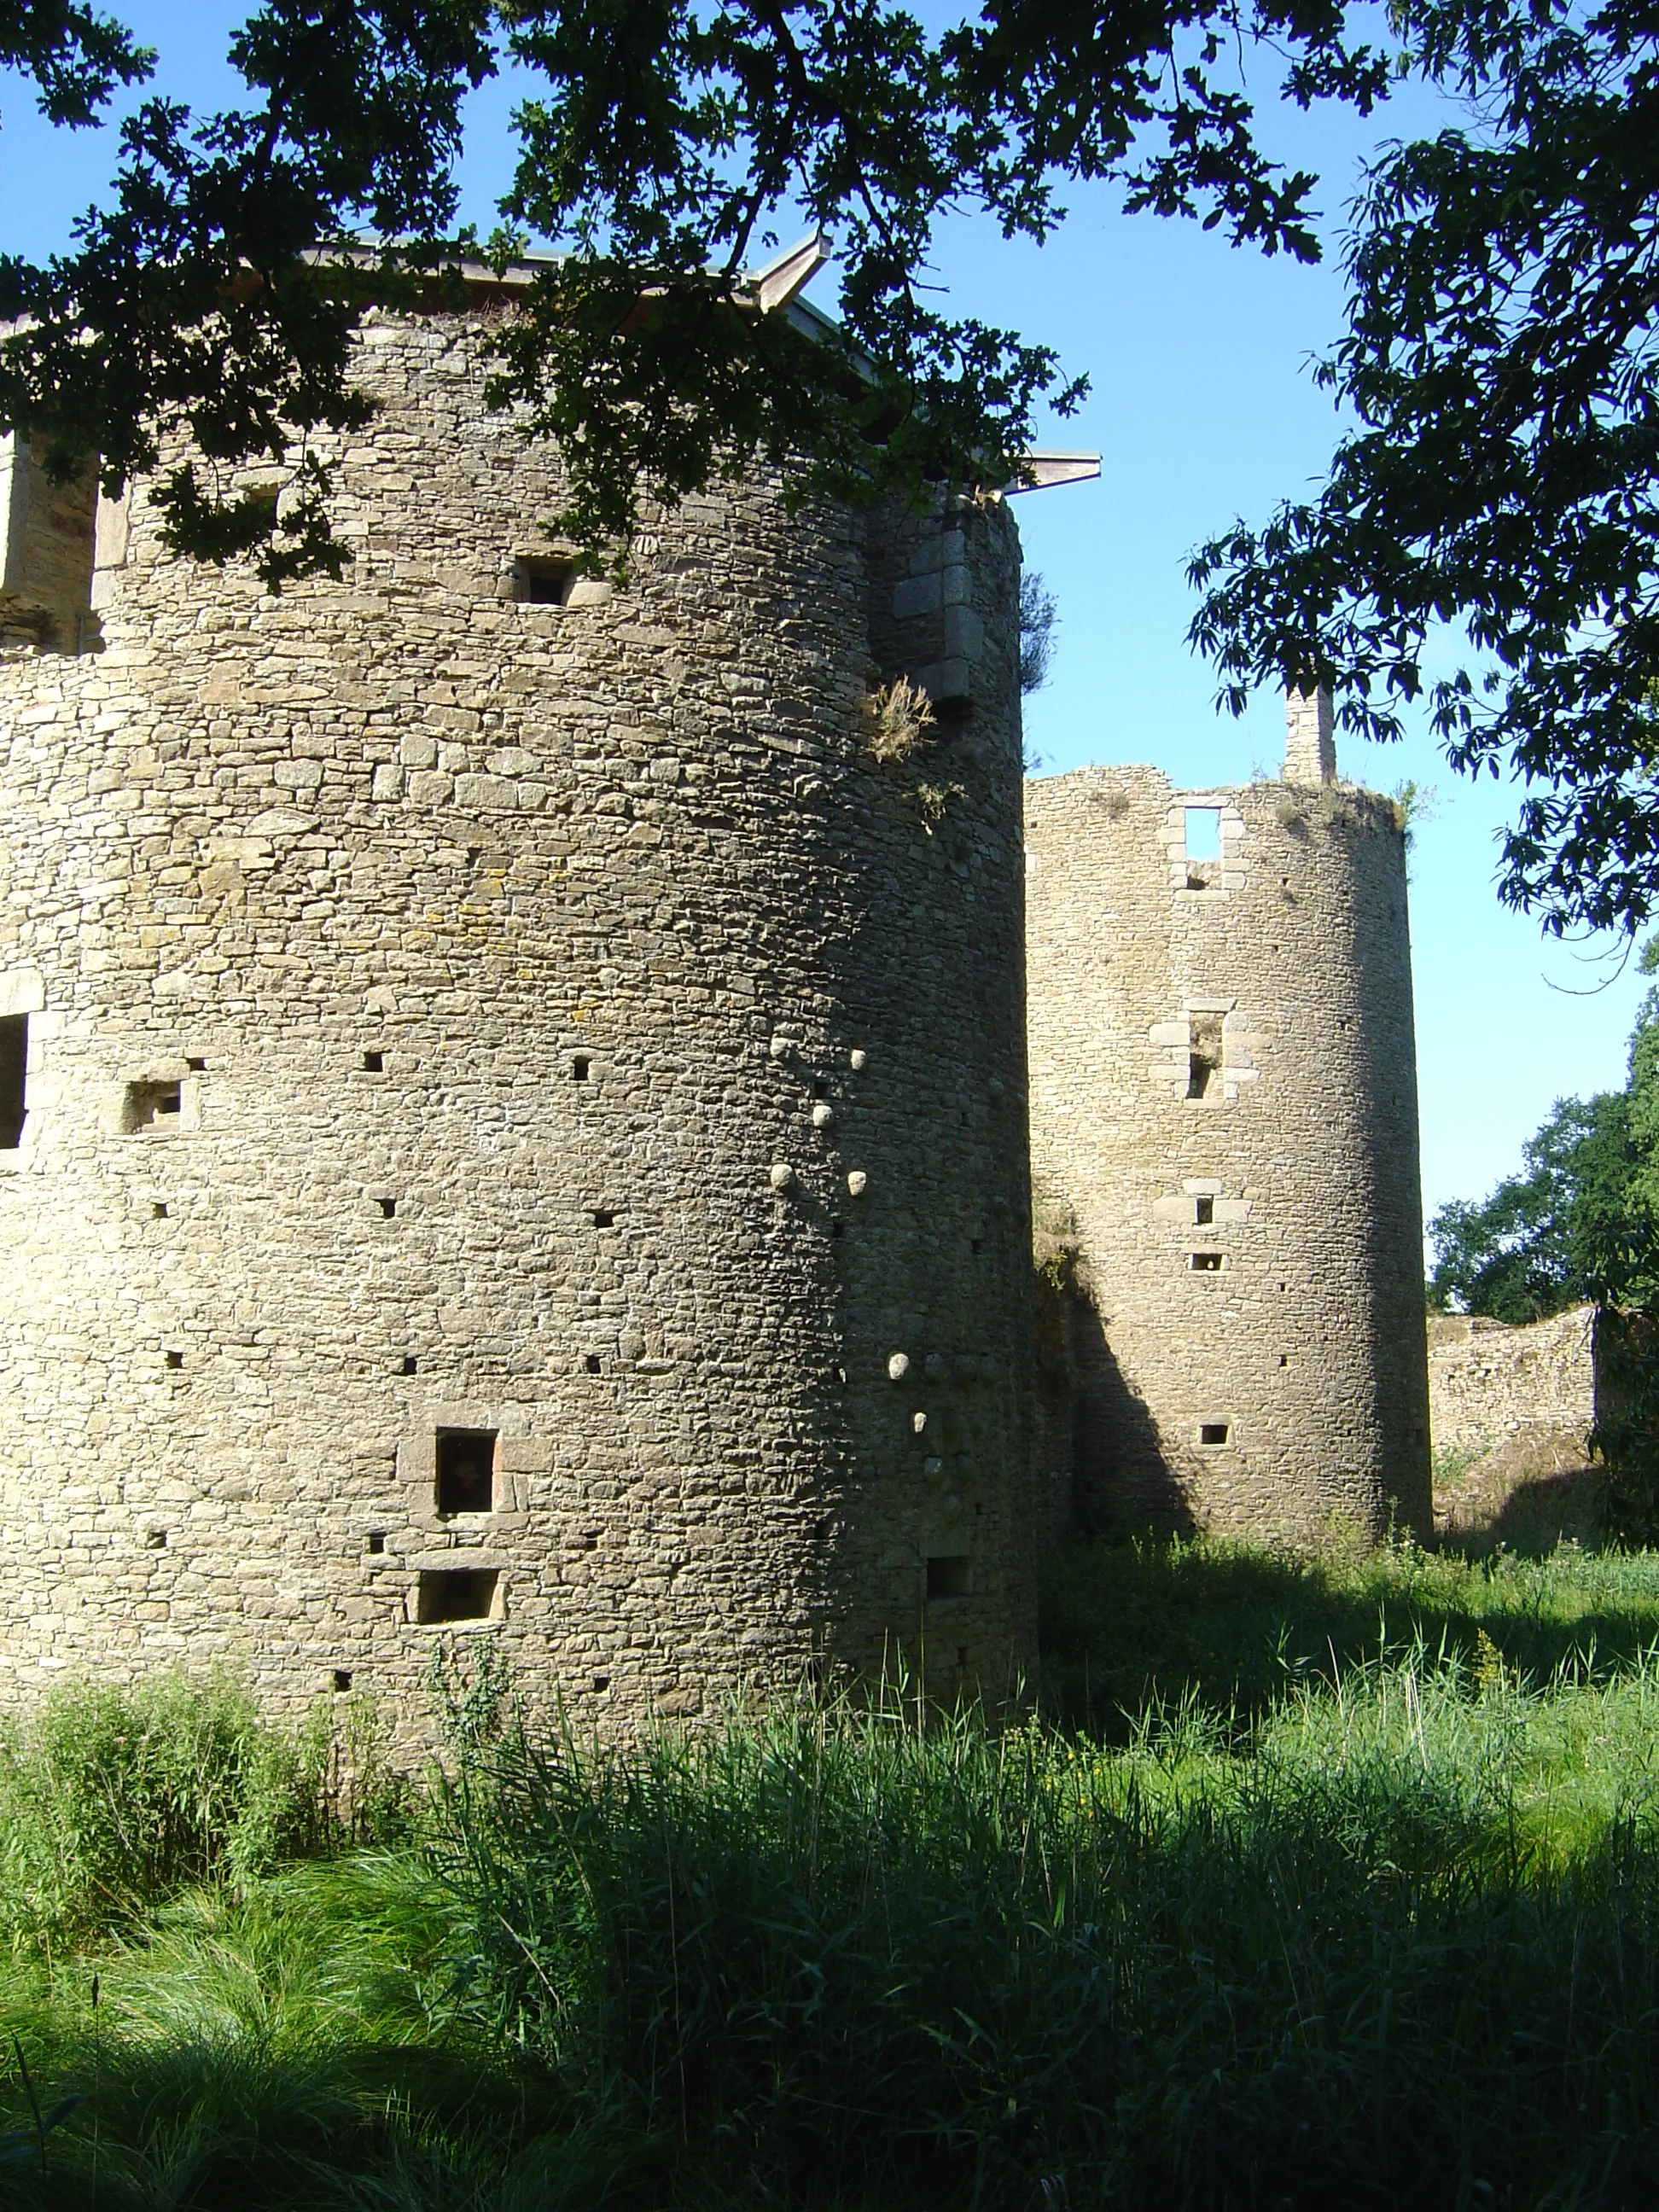 Photo showing: Château de Ranrouët, north tower in the foreground, northwest tower (part of the gatehouse) behind, outer bailey in the background